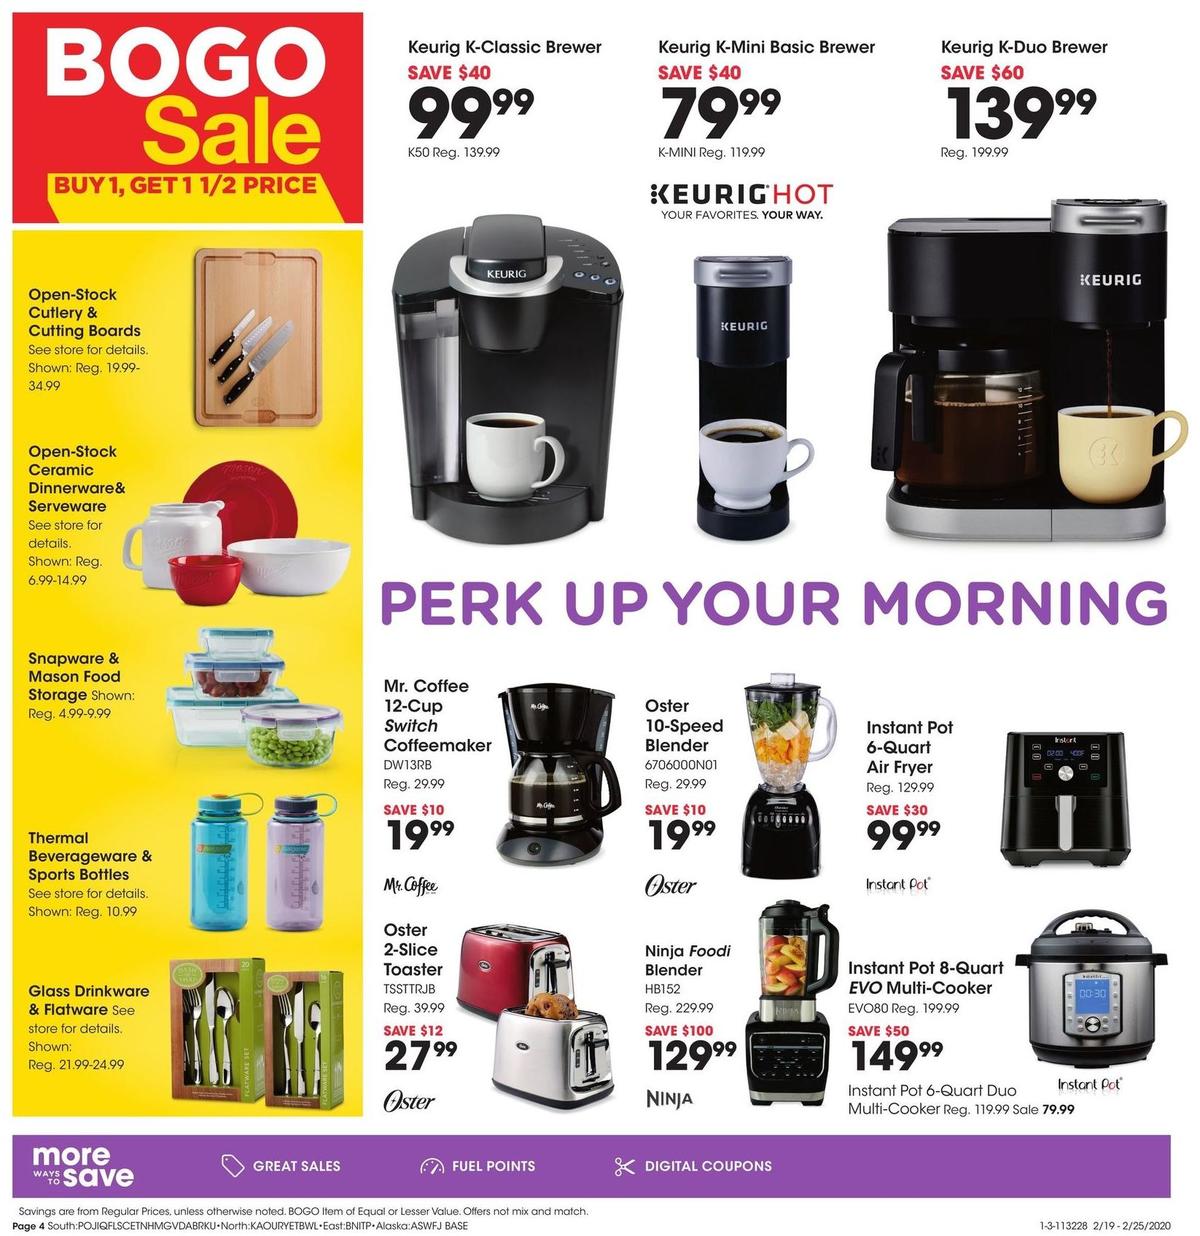 Fred Meyer General Merchandise Weekly Ad from February 19